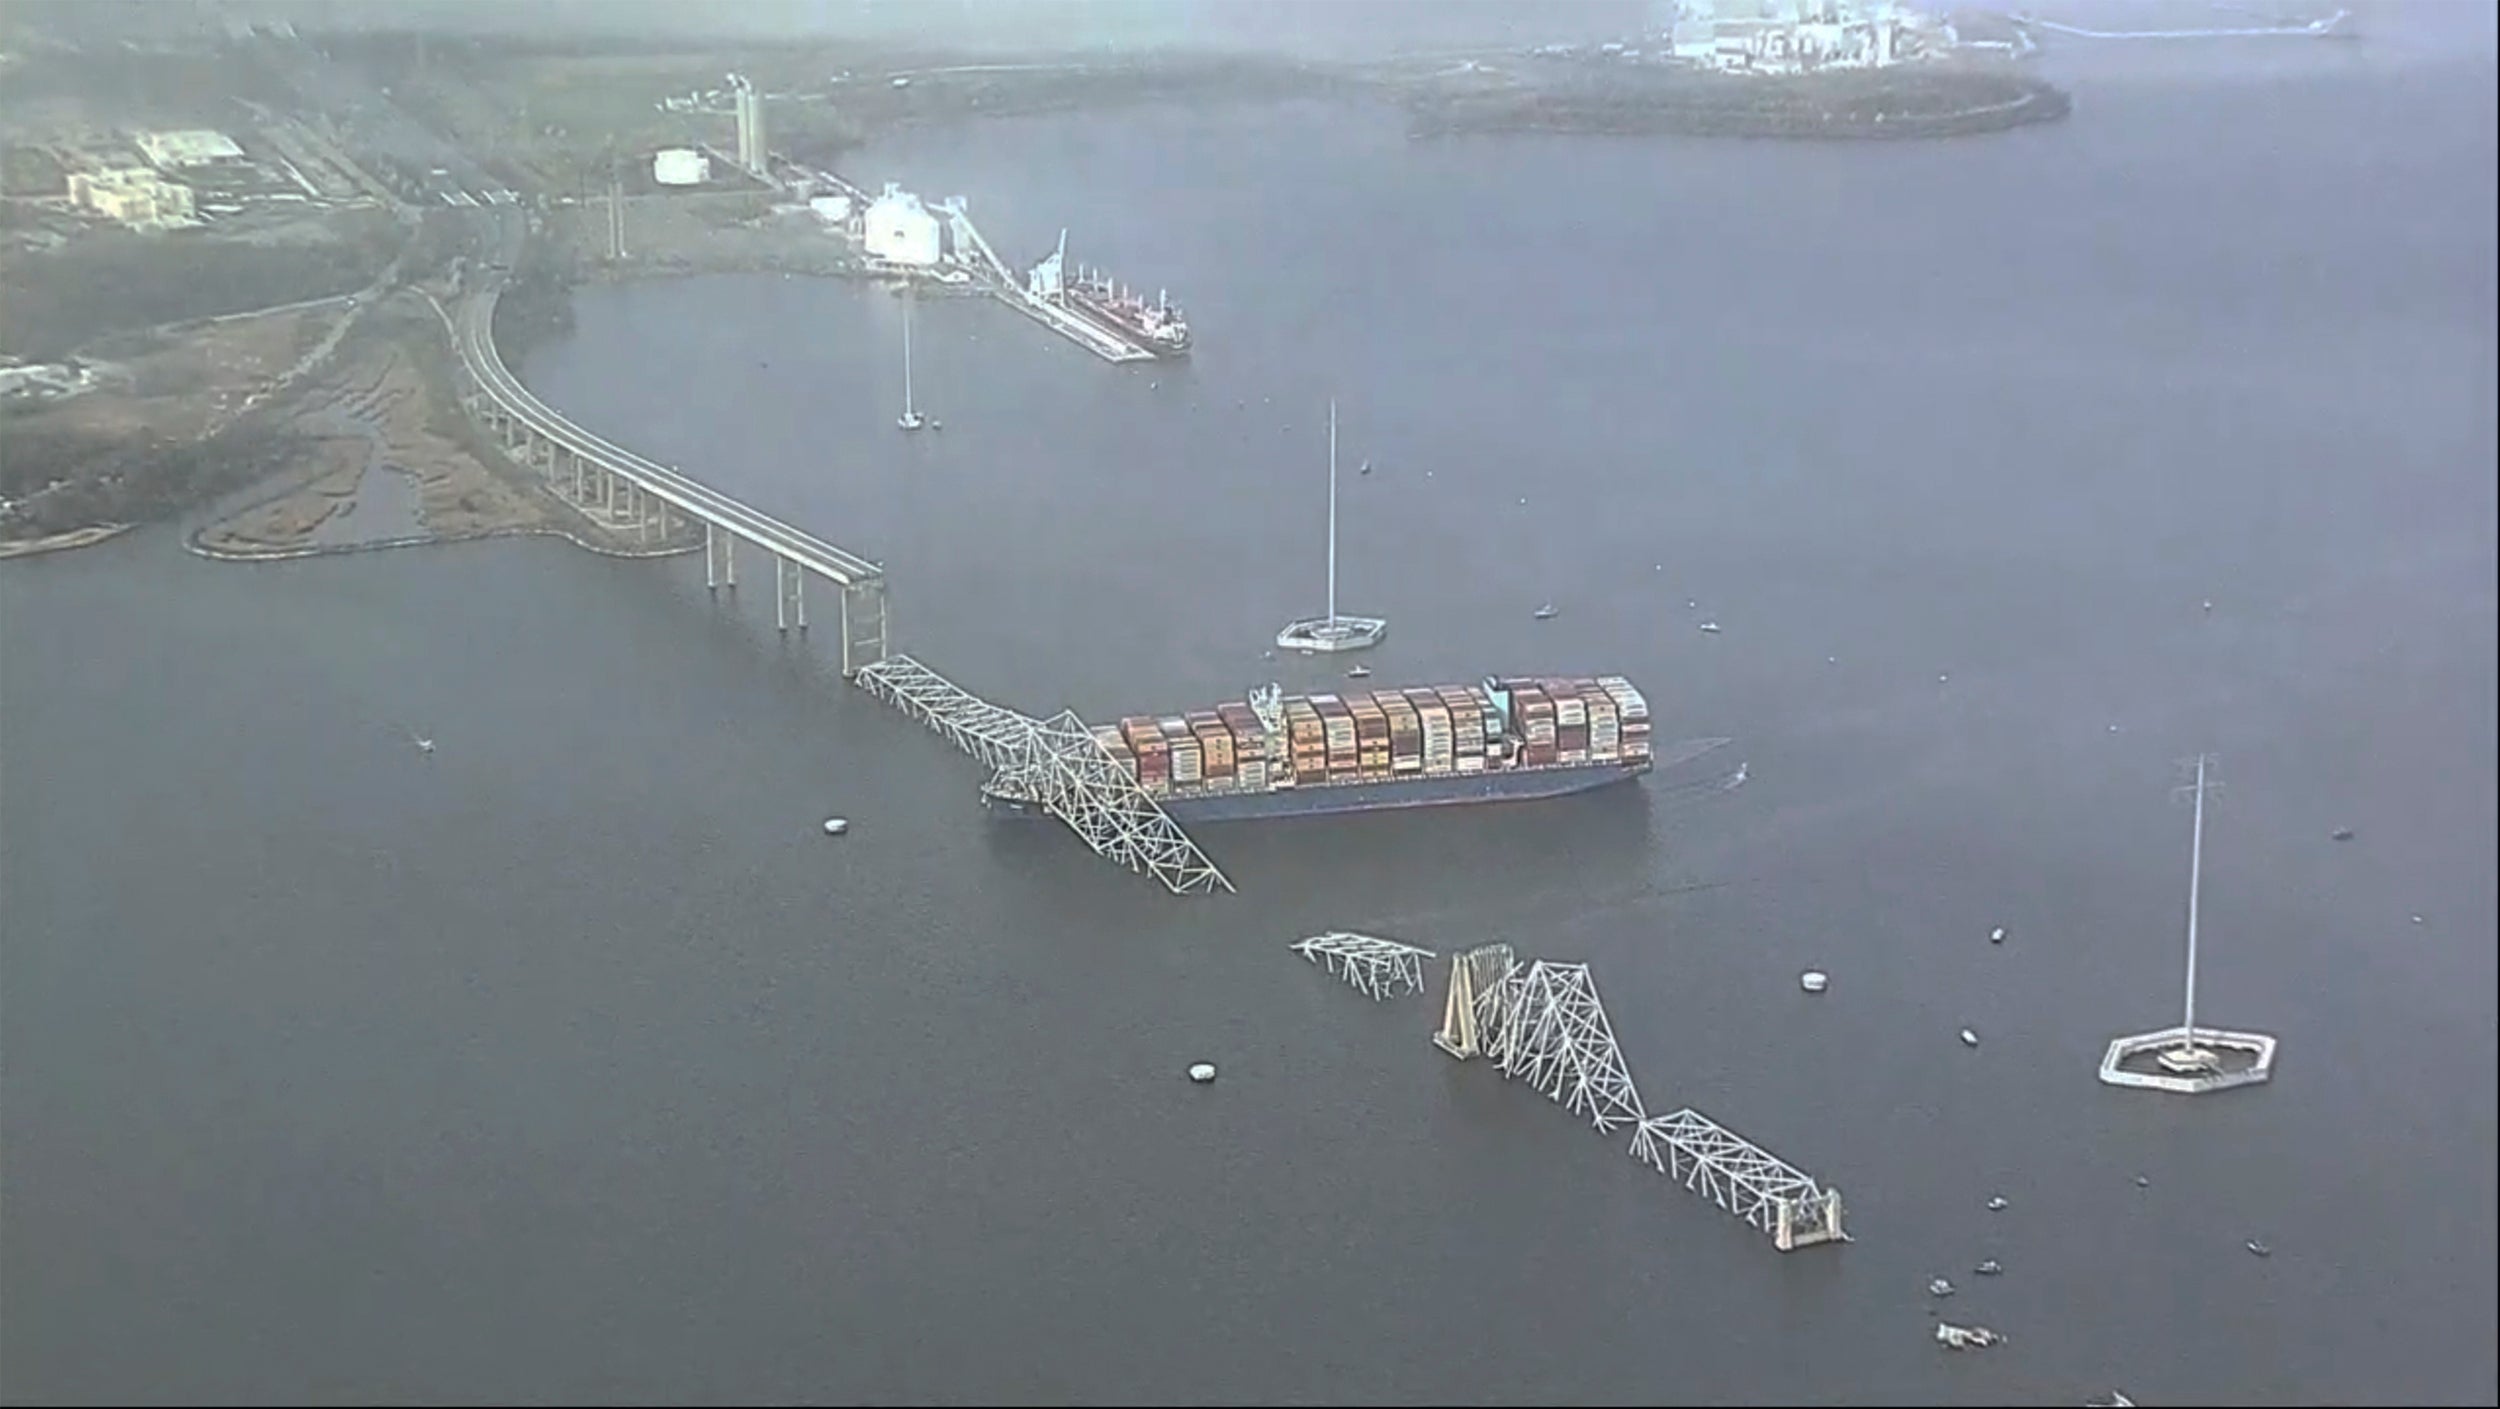 Parts of the Francis Scott Key Bridge remain after a container ship collided with one of the bridge’s support